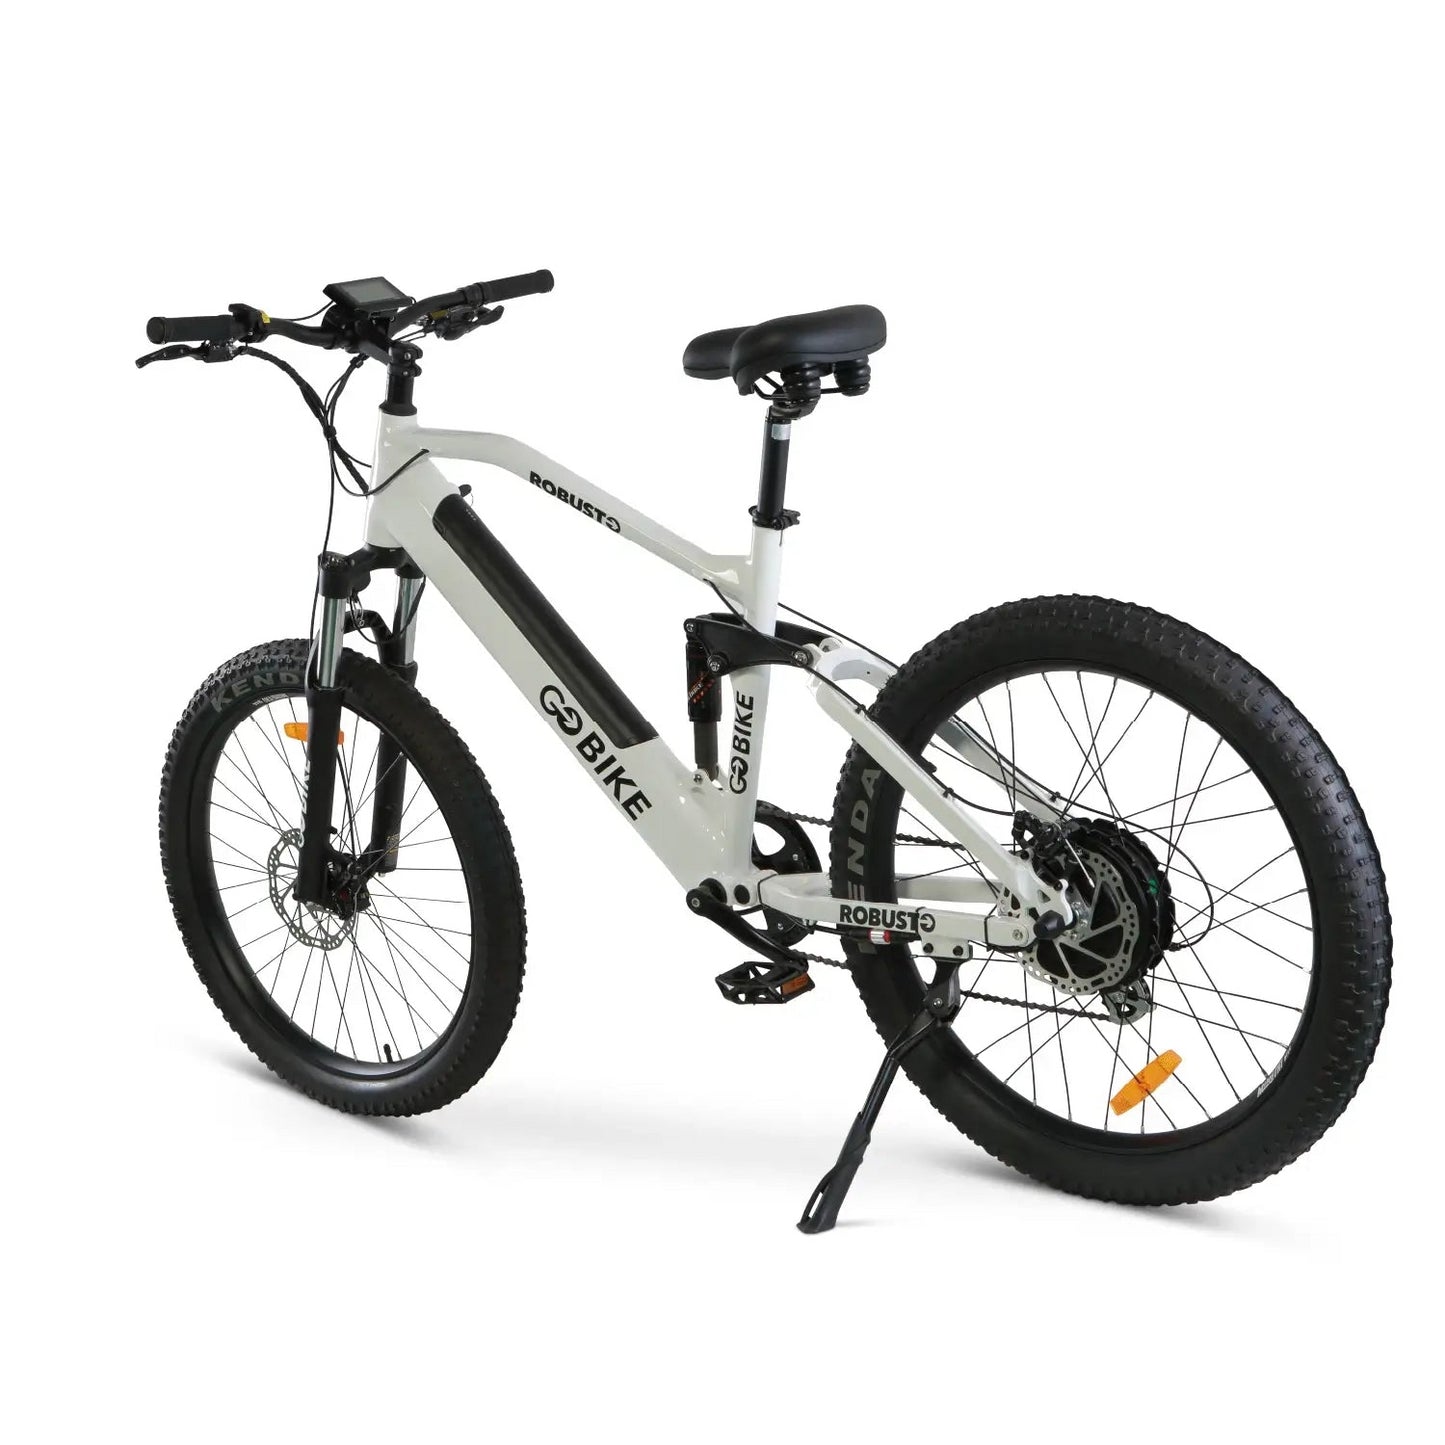 GOBIKE ROBUSTO Electric Mountain Bike-My Perfect Scooter